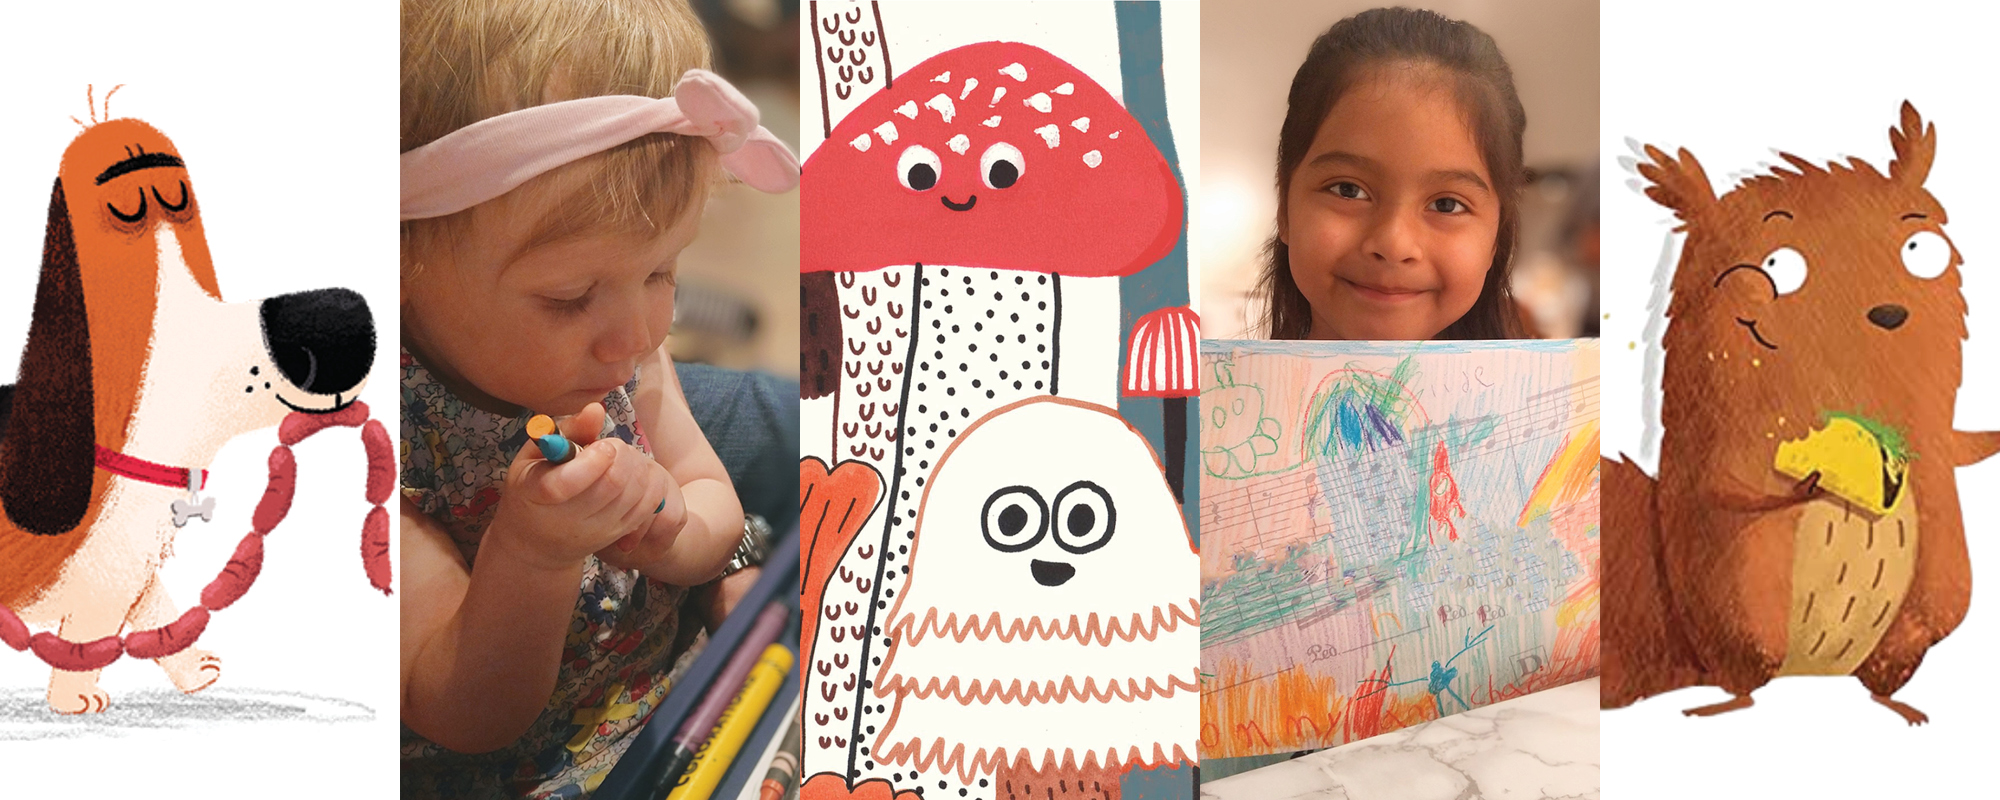 Illustrations of children's storybook characters and photos of children engaging in art activities.